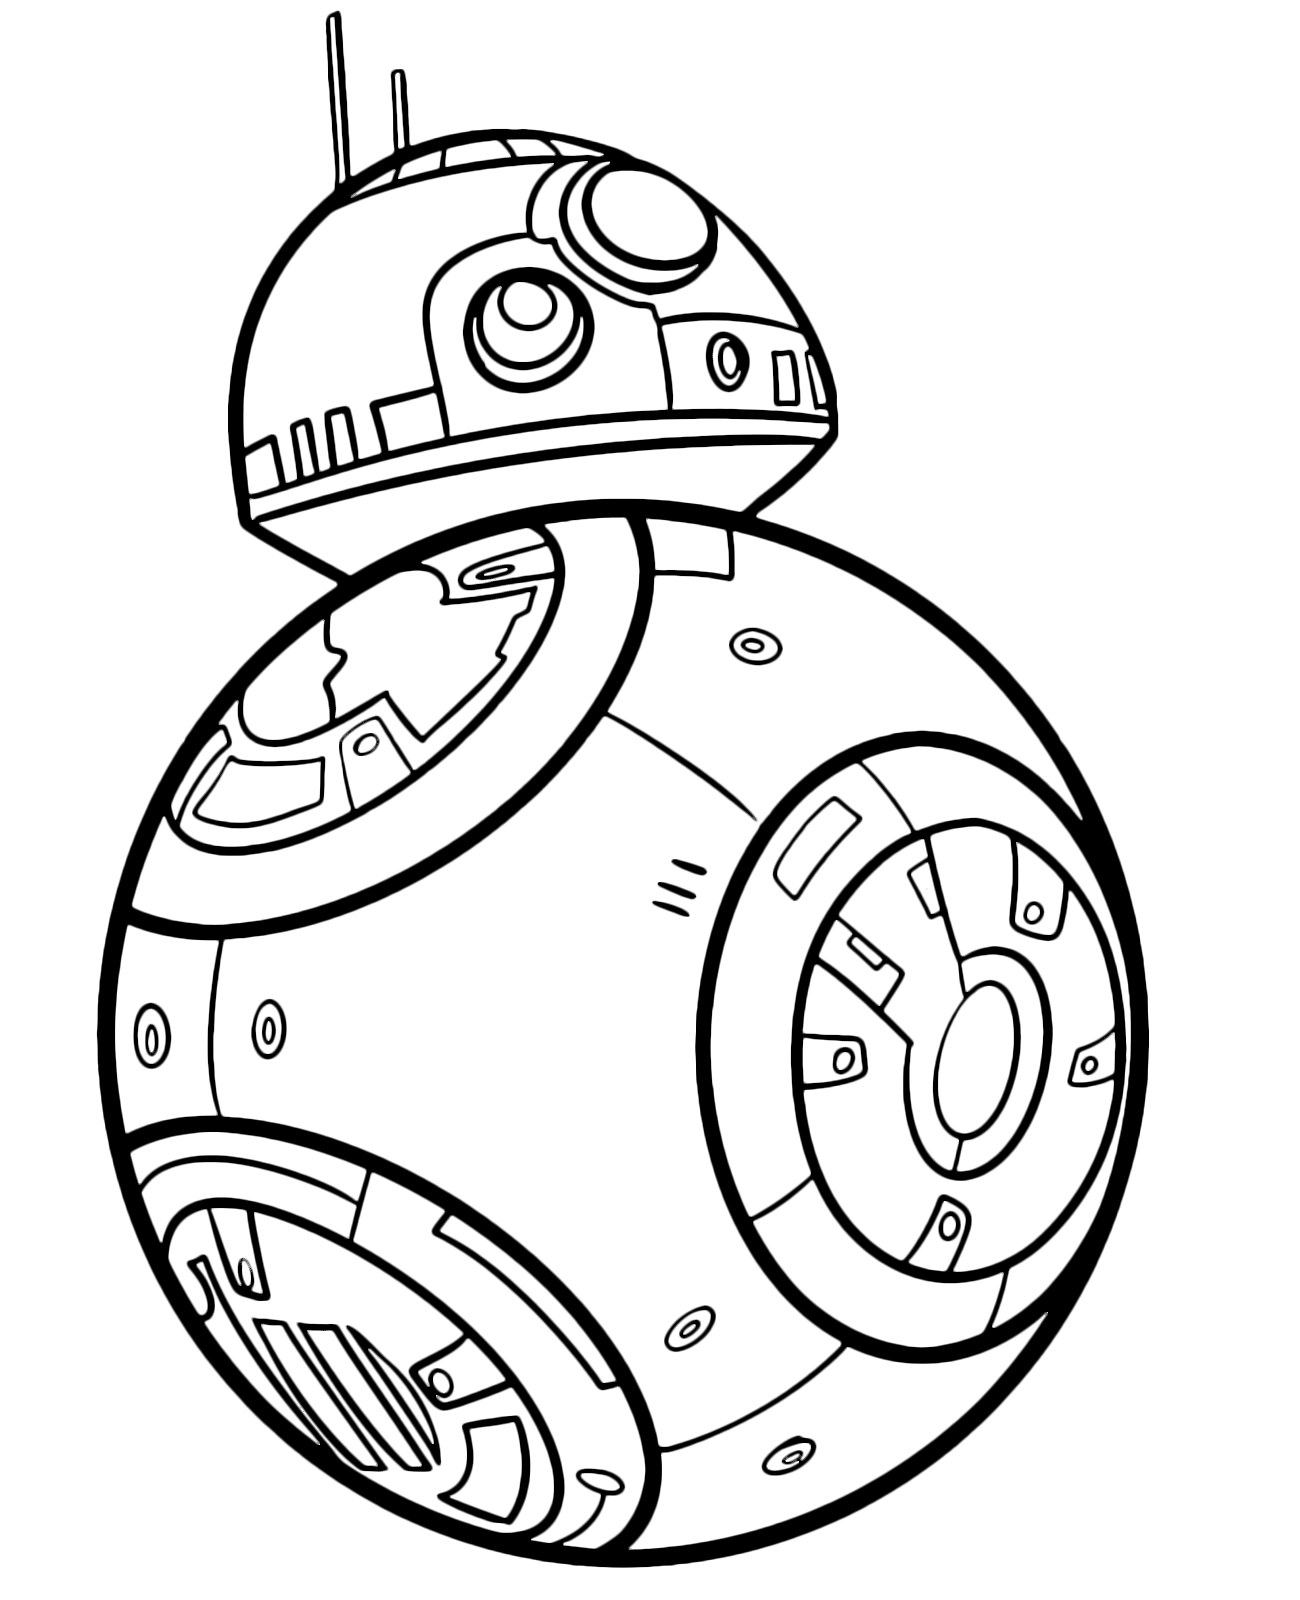 Poe dameron coloring pages printable for free download